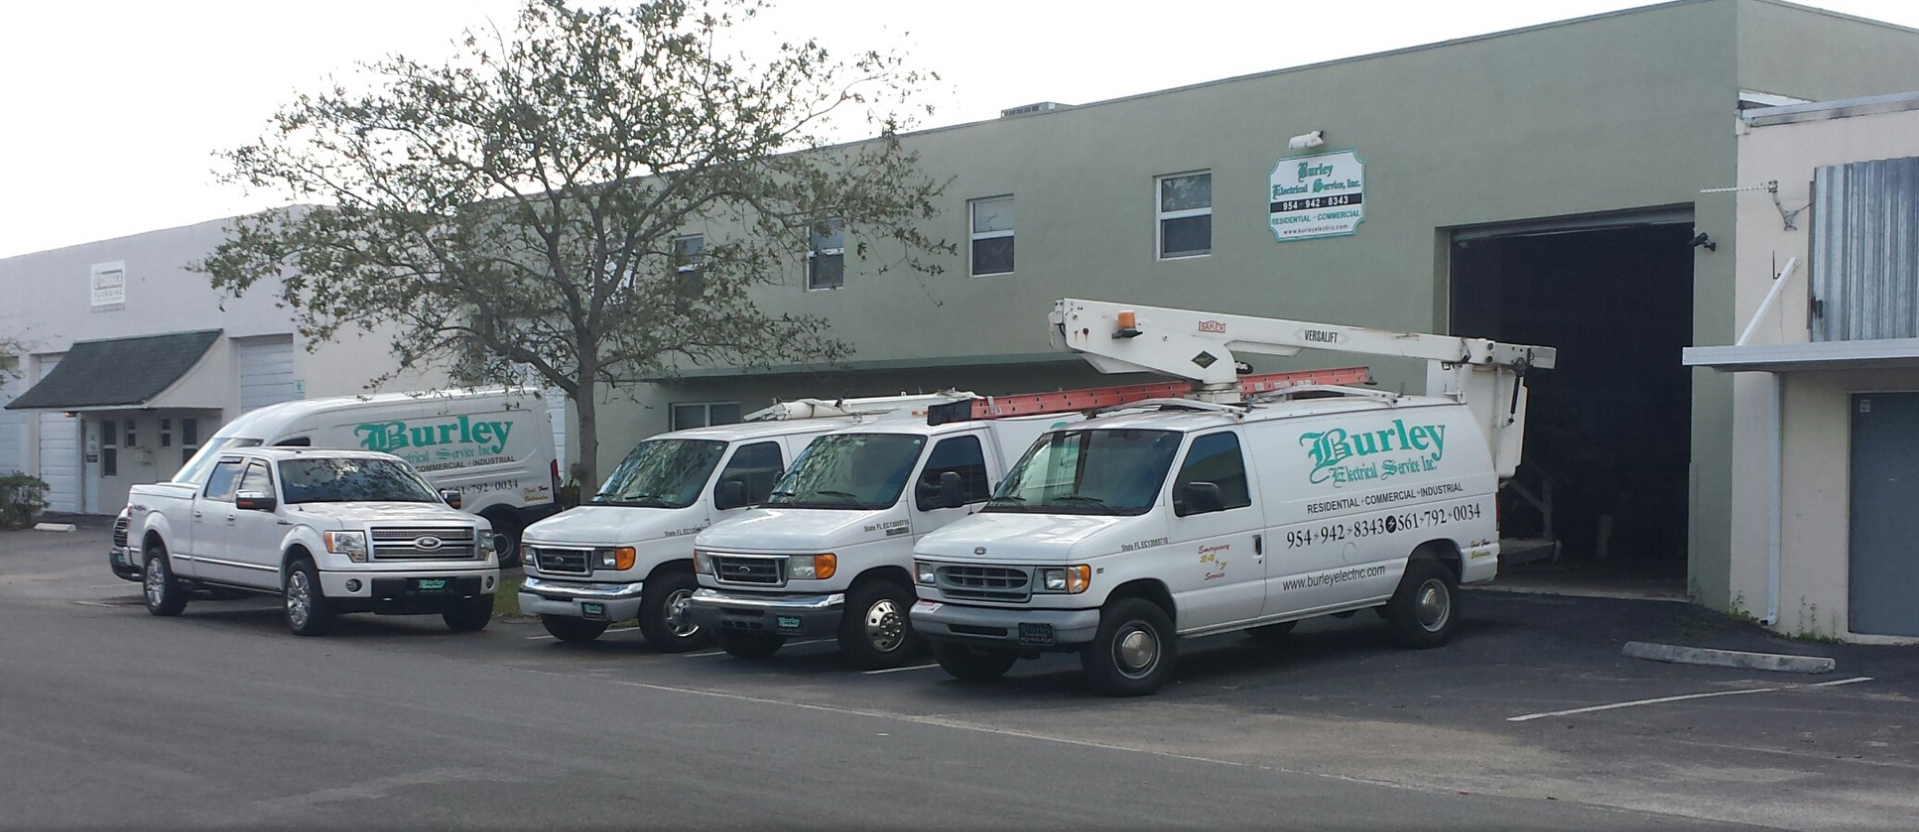 Burley Electrical Services of Miami Gardens, FL